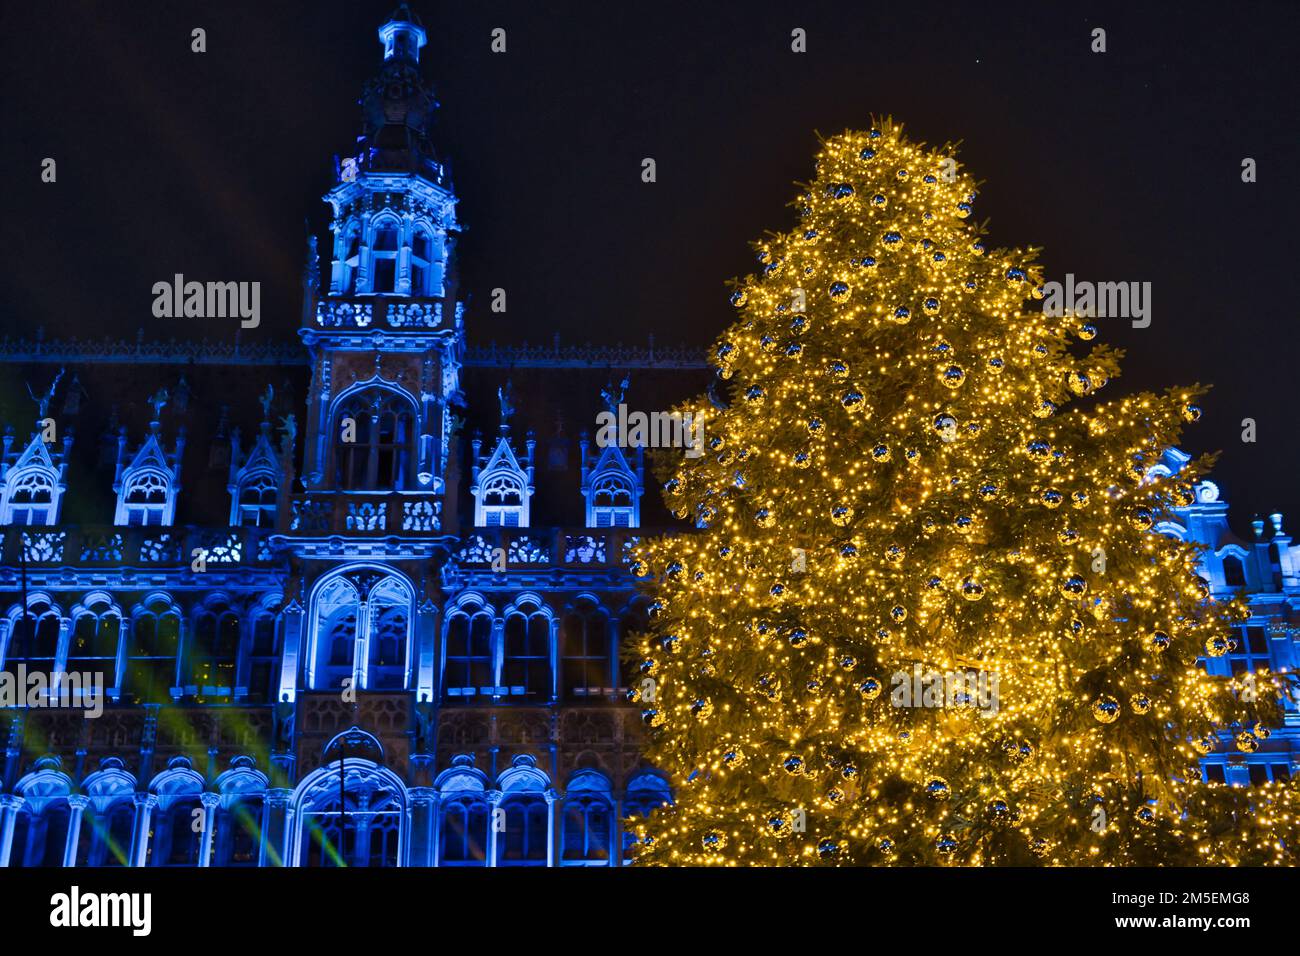 Detail of the facade of the gothic building with the Christmas tree with colored light Stock Photo